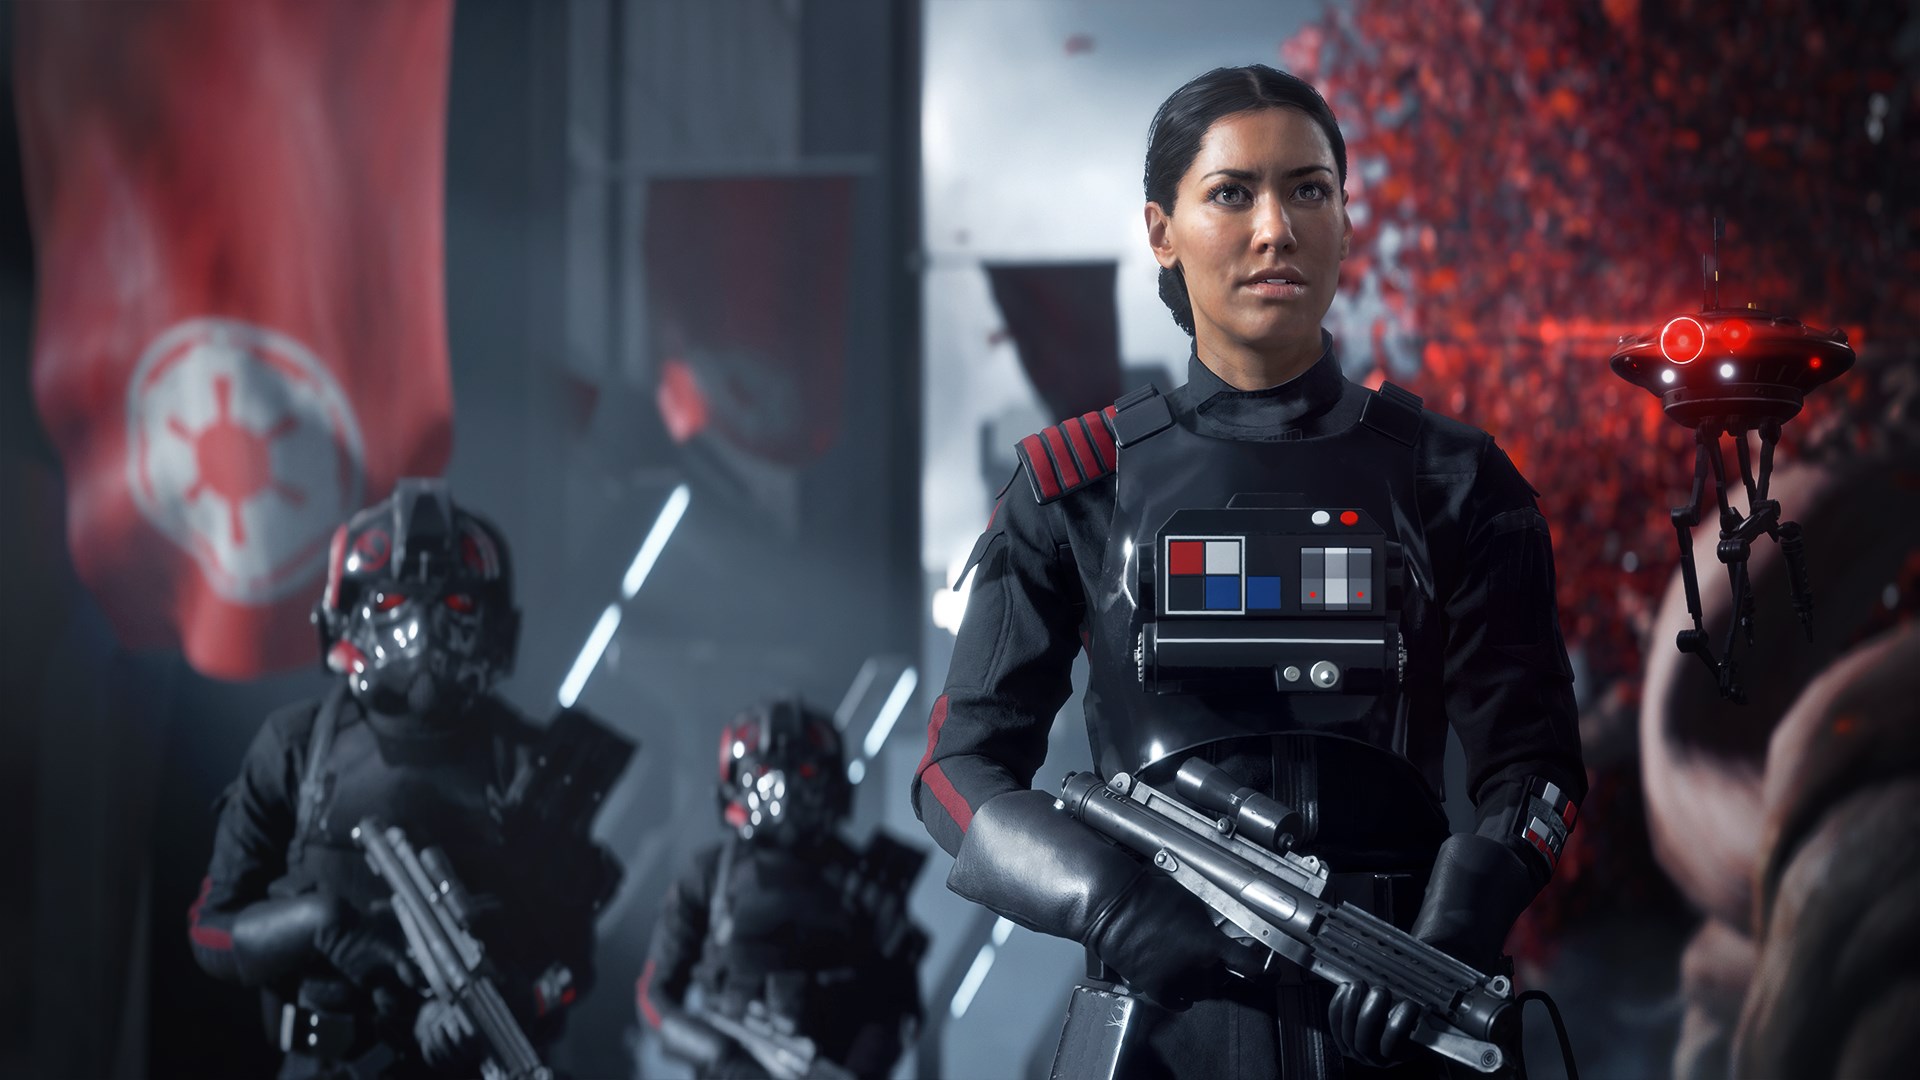  Star Wars Battlefront 2 goes free on the Epic Store next week 